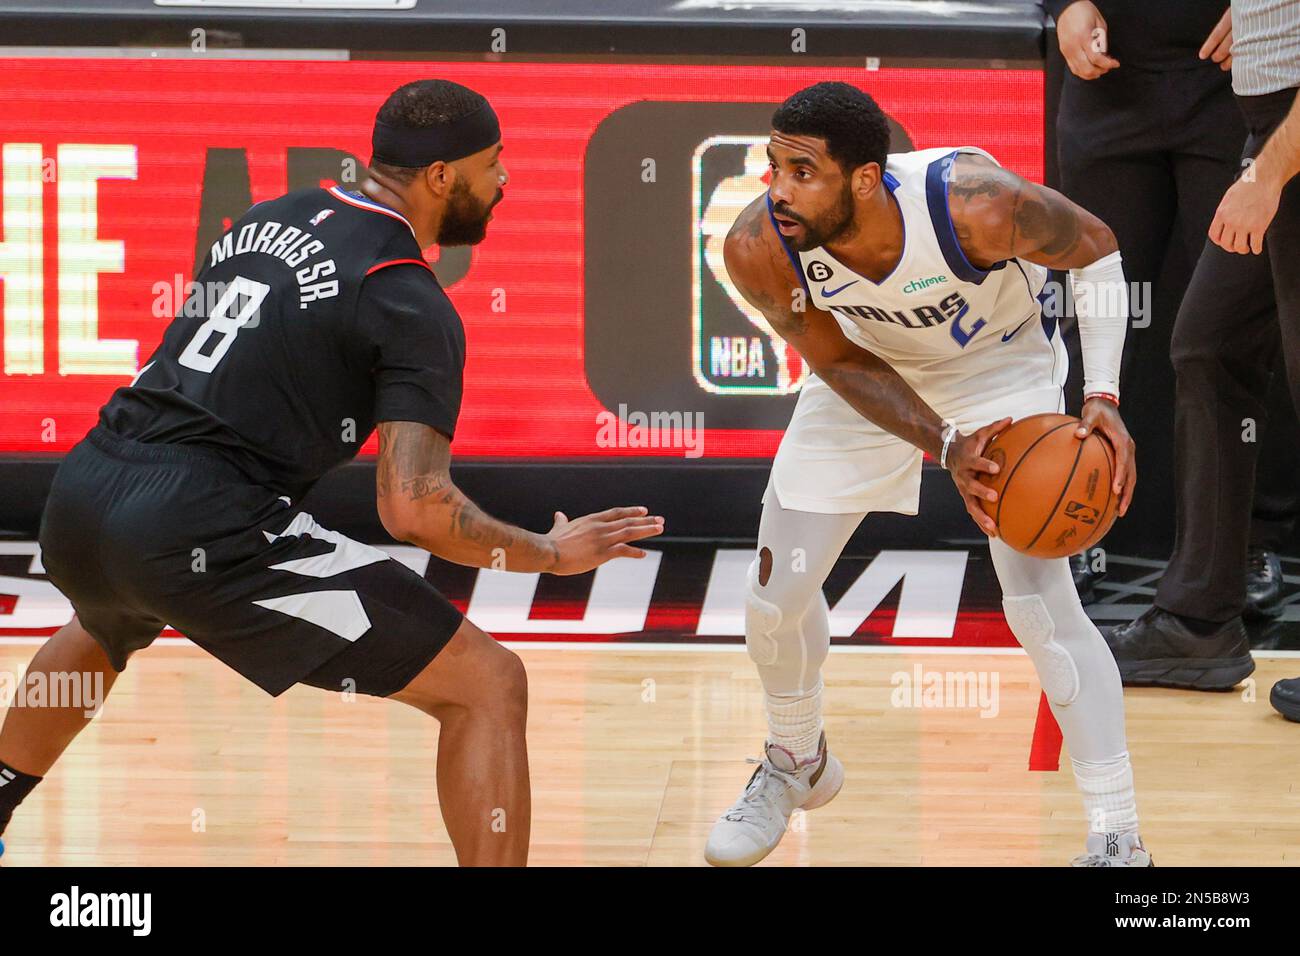 Los Angeles, United States. 08th Feb, 2023. Marcus Morris Sr. (L) of Los  Angeles Clippers and Kyrie Irving (R) of Mavericks Dallas in action during  the NBA basketball game between Clippers and